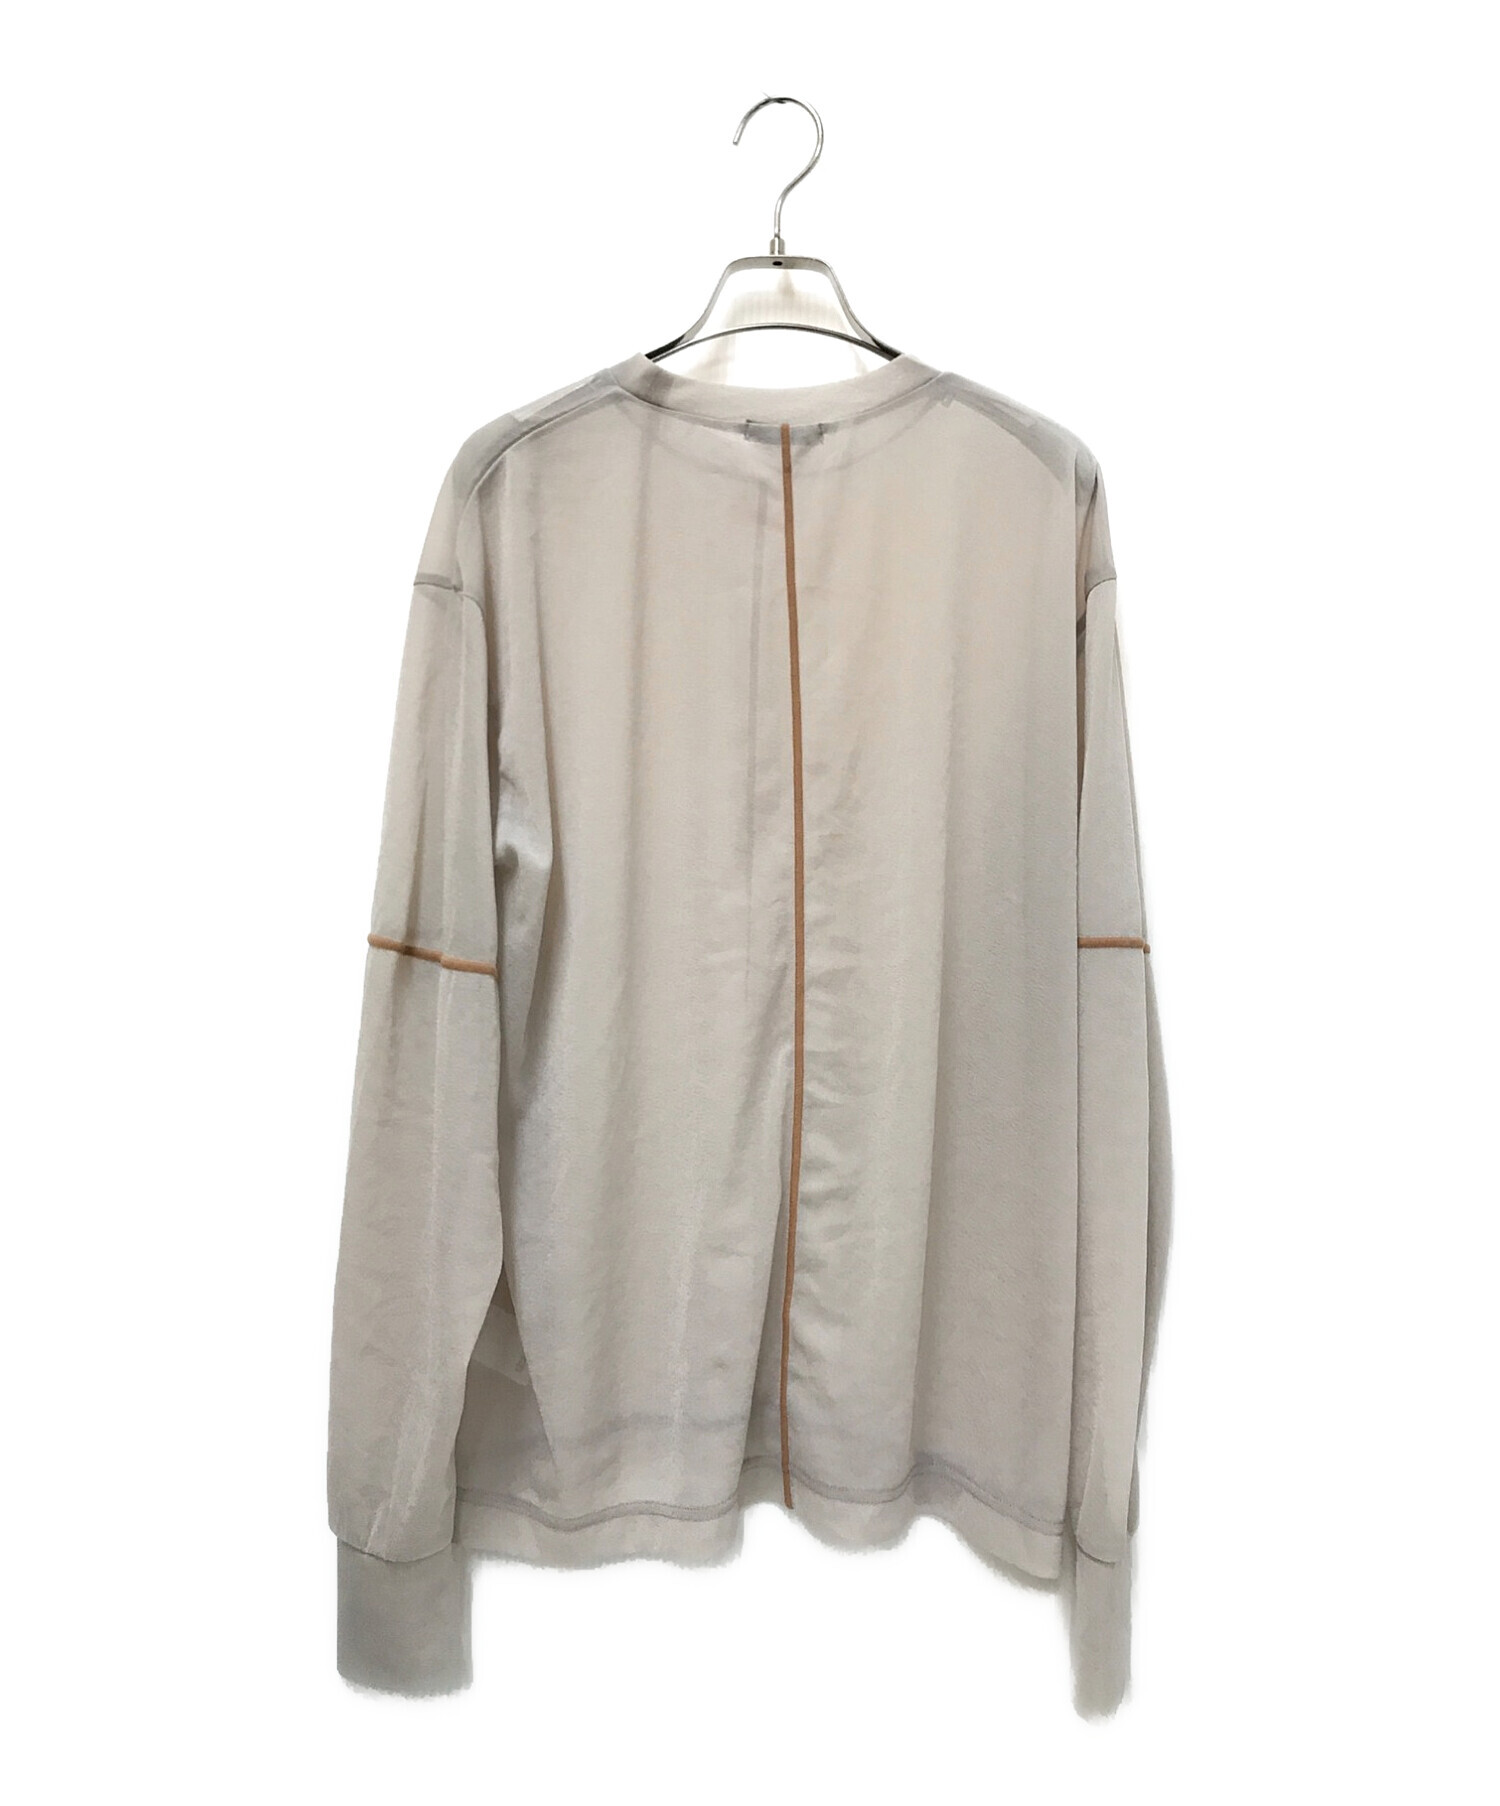 CLANE SOLID SLEEVE SHEER L/S TOPS - カットソー(長袖/七分)